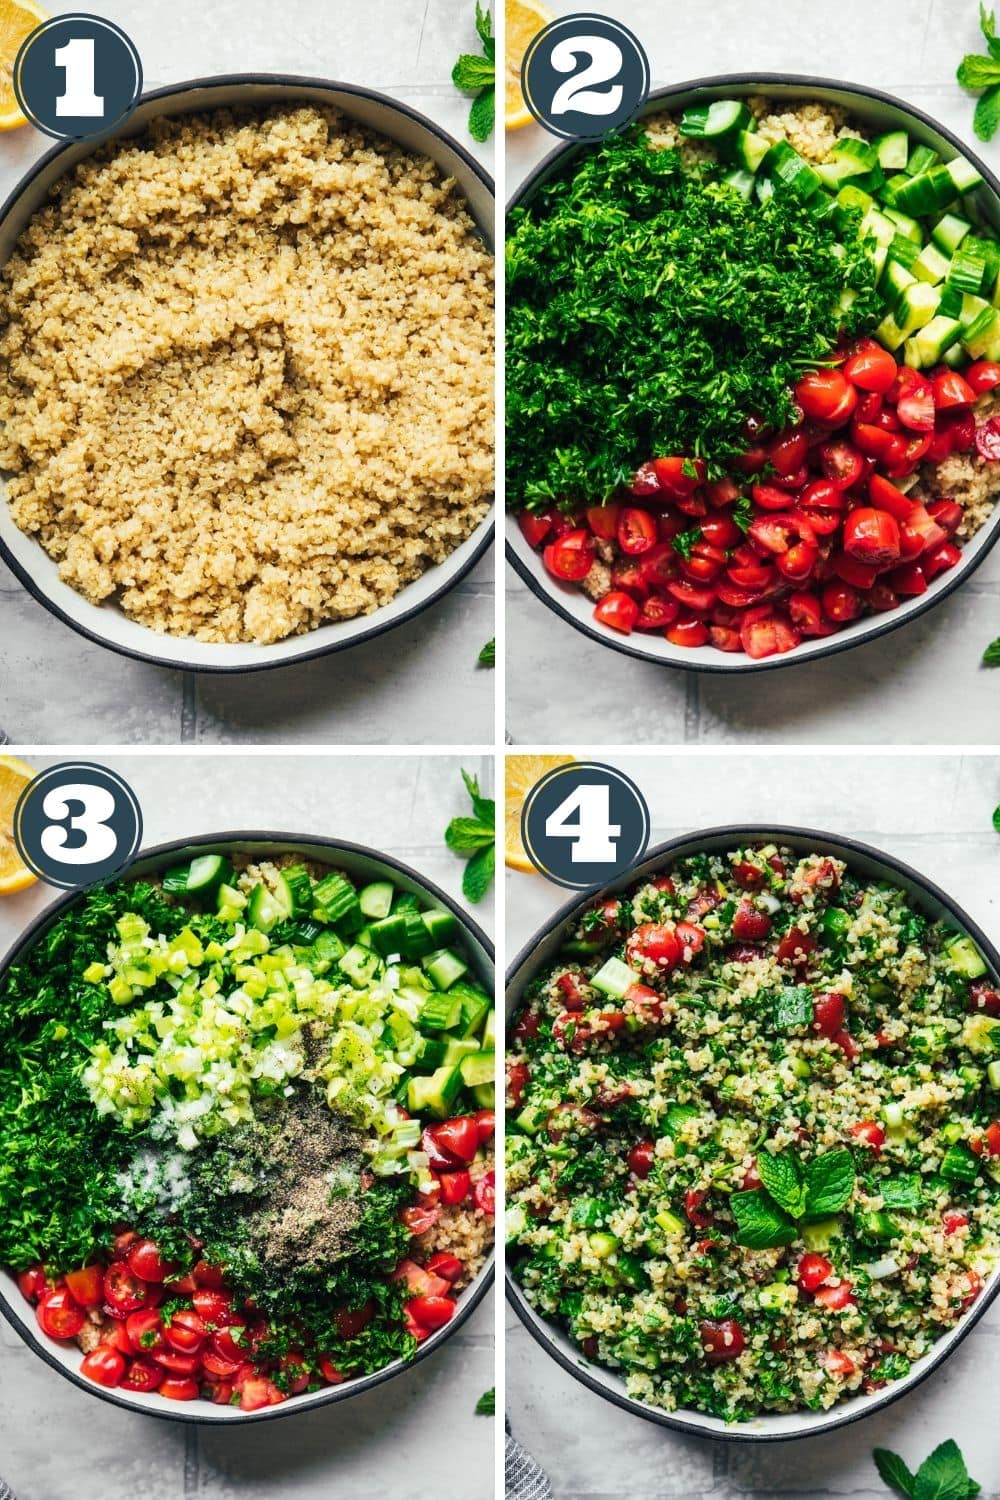 How to assemble a quinoa tabbouleh salad in 4 steps. 